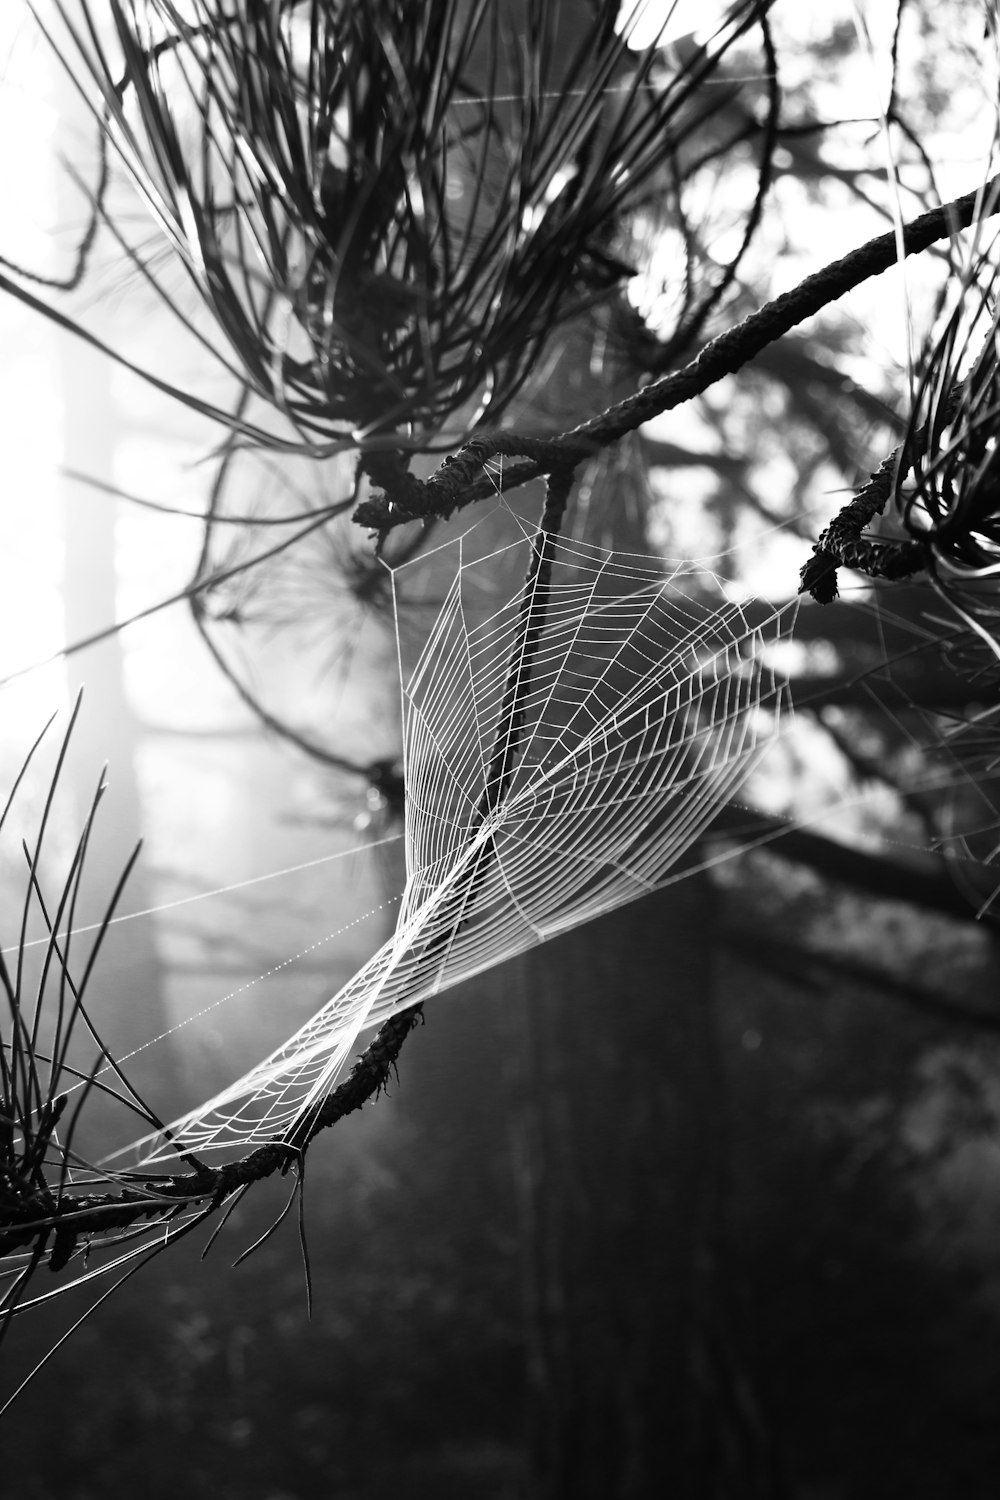 grayscale photo of spider web on tree branch